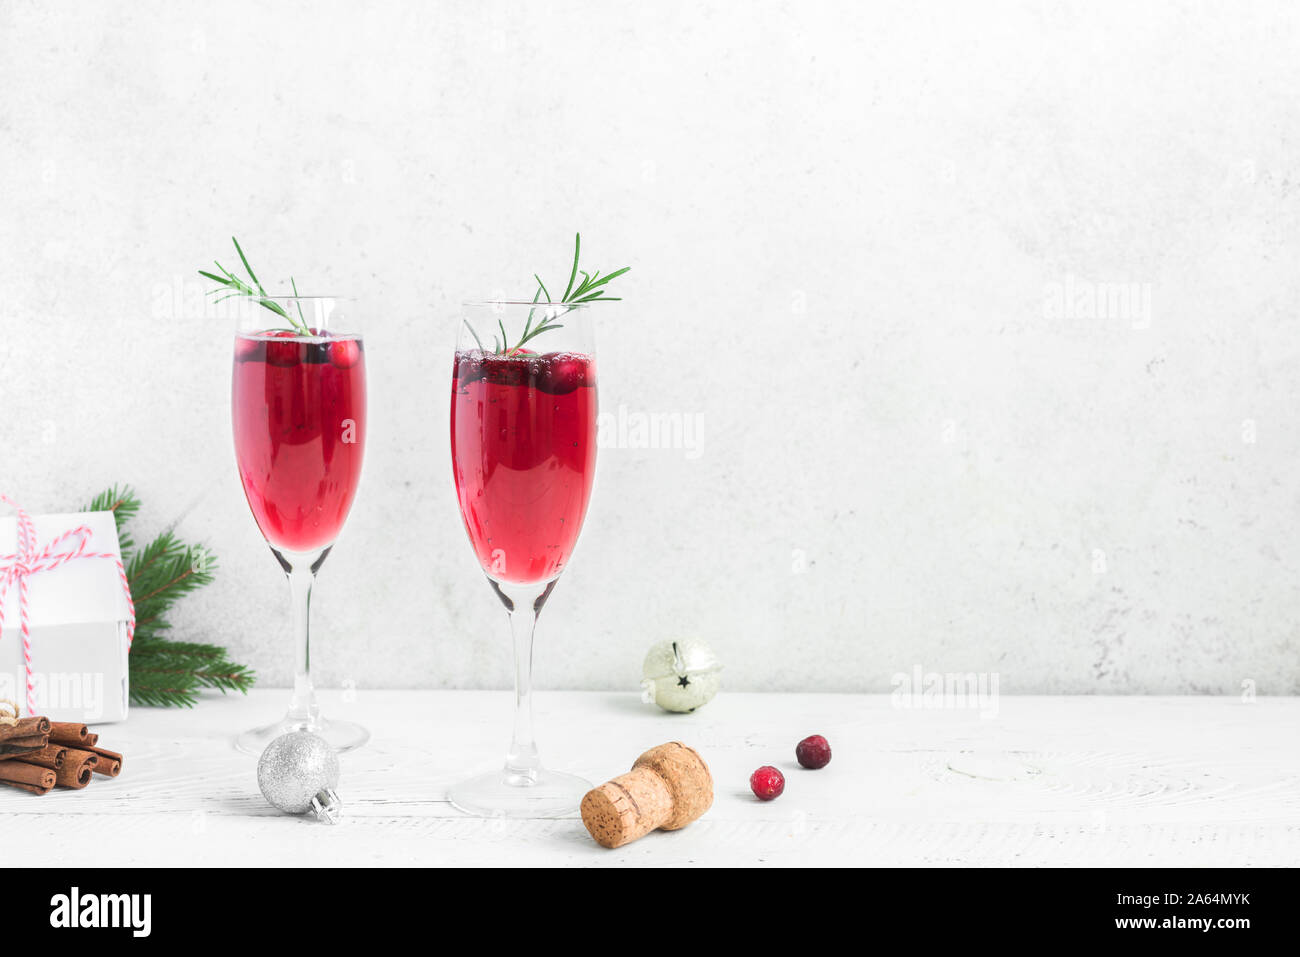 Christmas red cranberry mimosa with rosemary on white background, copy space. Cocktail with champagne for Christmas morning. Stock Photo